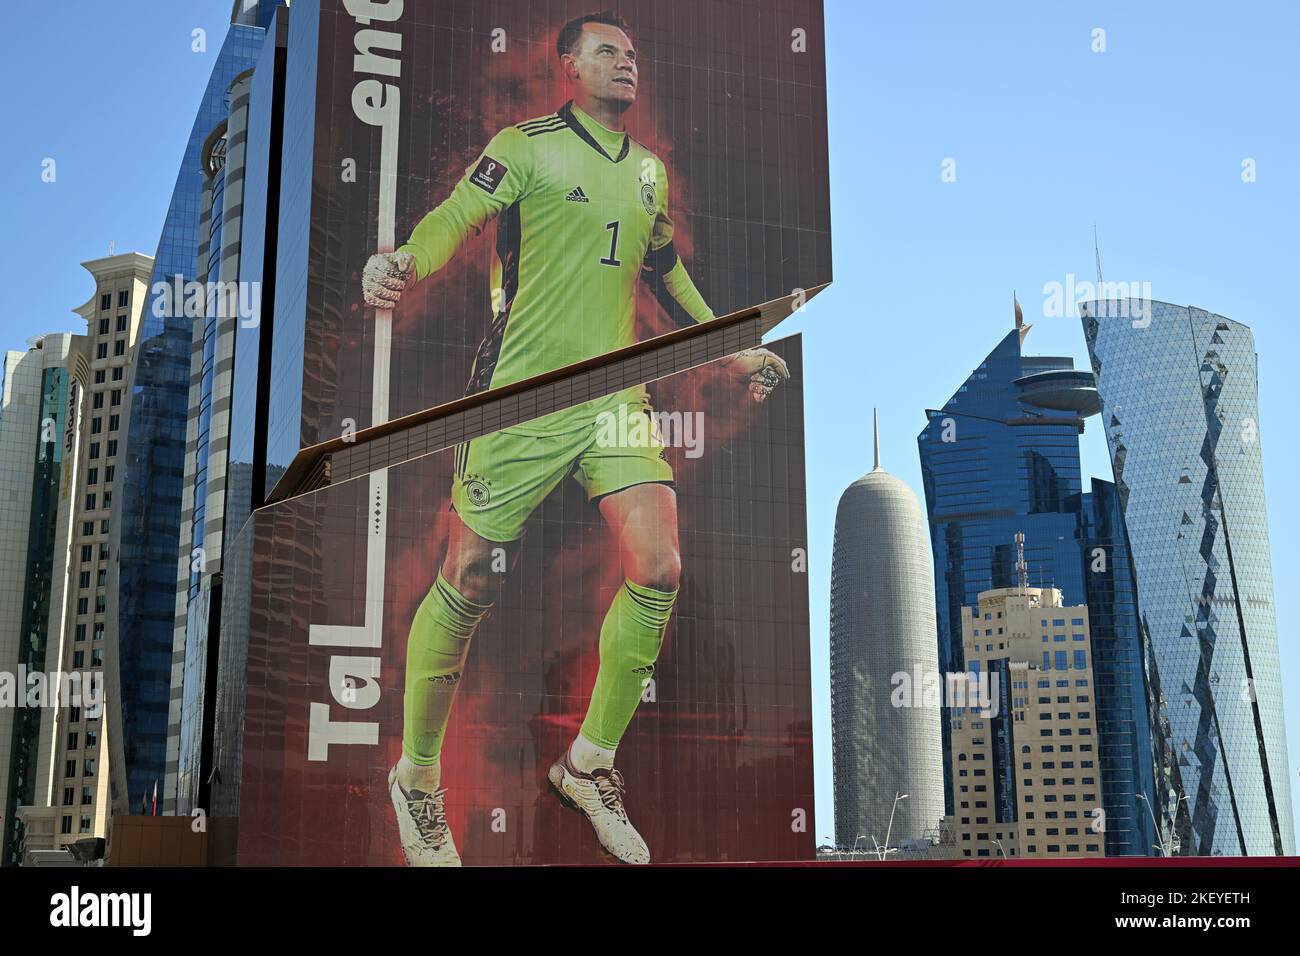 Doha, Qatar. 15th Nov, 2022. Oversized, the German goalkeeper Manuel Neuer is attached to the facade of a building. The opening match between Qatar and Ecuador will kick off the 2022 World Cup on Nov. 20. Credit: Federico Gambarini/dpa/Alamy Live News Stock Photo